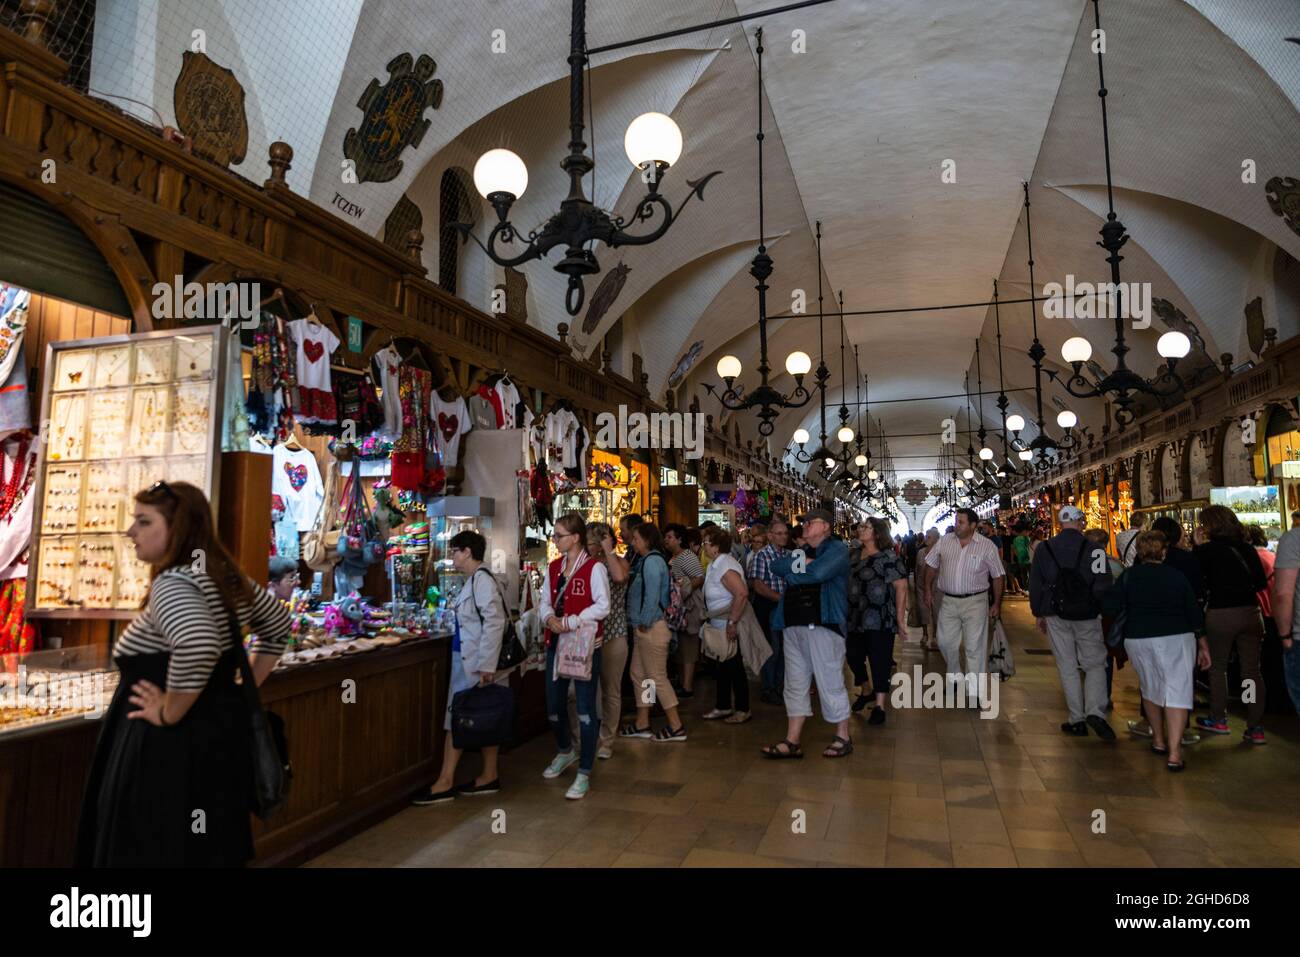 Krakow, Poland - August 28, 2018: Polish pottery shop in the Krakow Cloth Hall or Sukiennice in the Main Market Square or Rynek Glowny with people aro Stock Photo